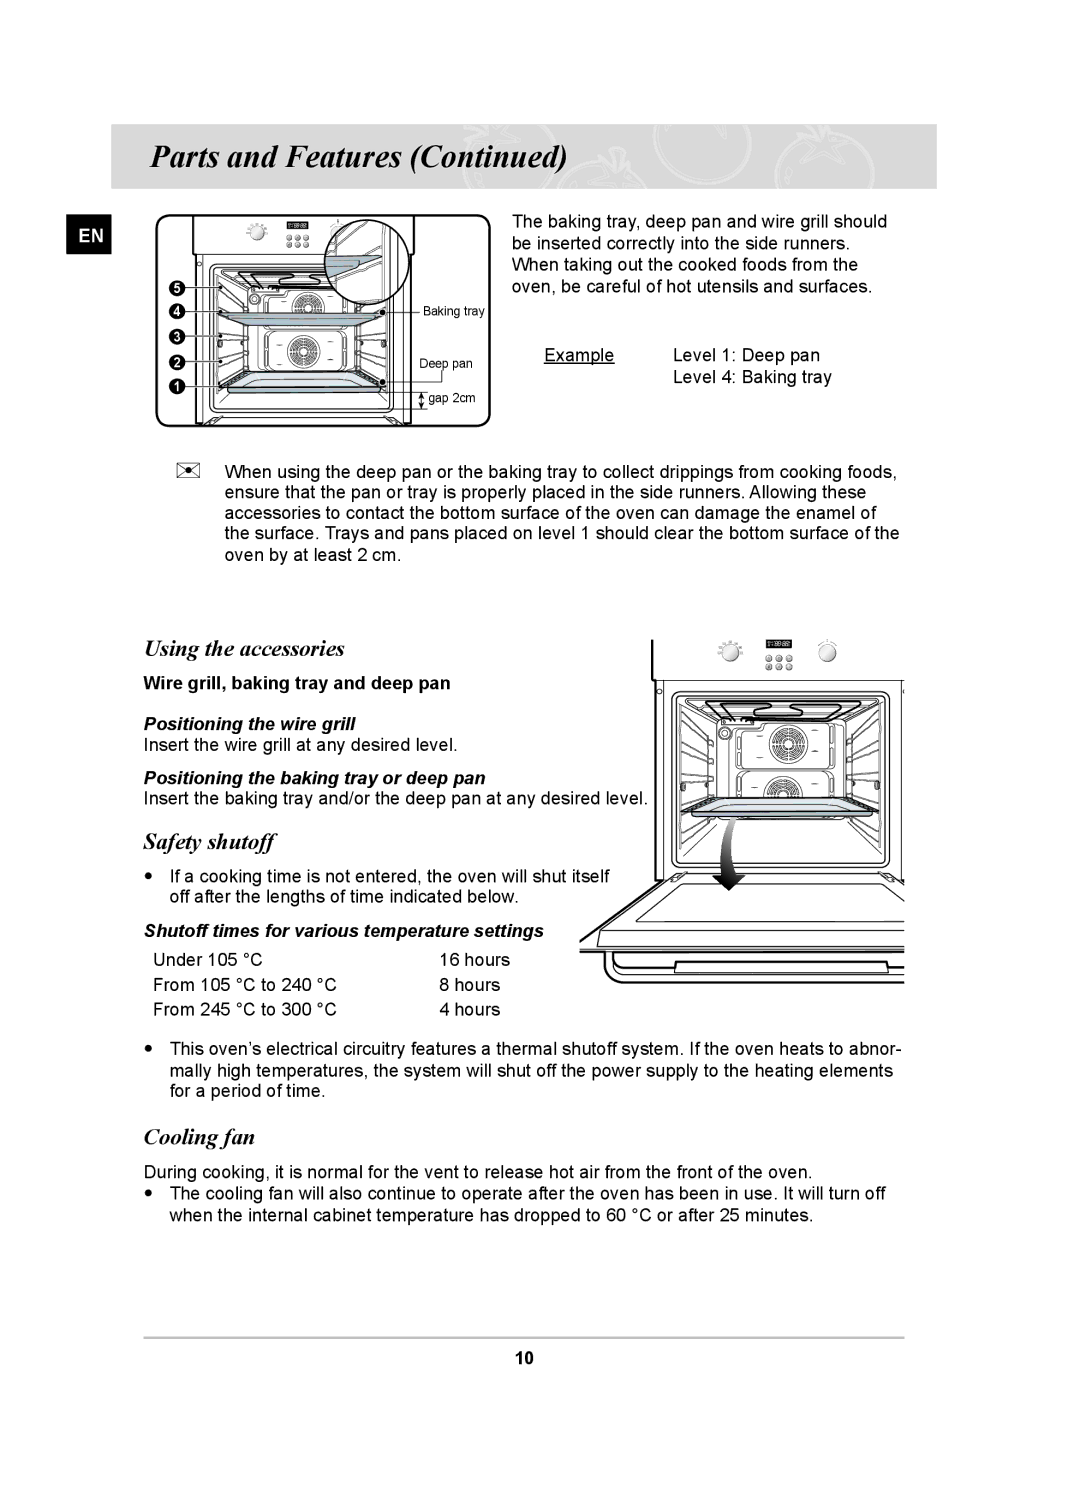 Samsung BF64CCST/SLI manual Using the accessories, Safety shutoff, Cooling fan 